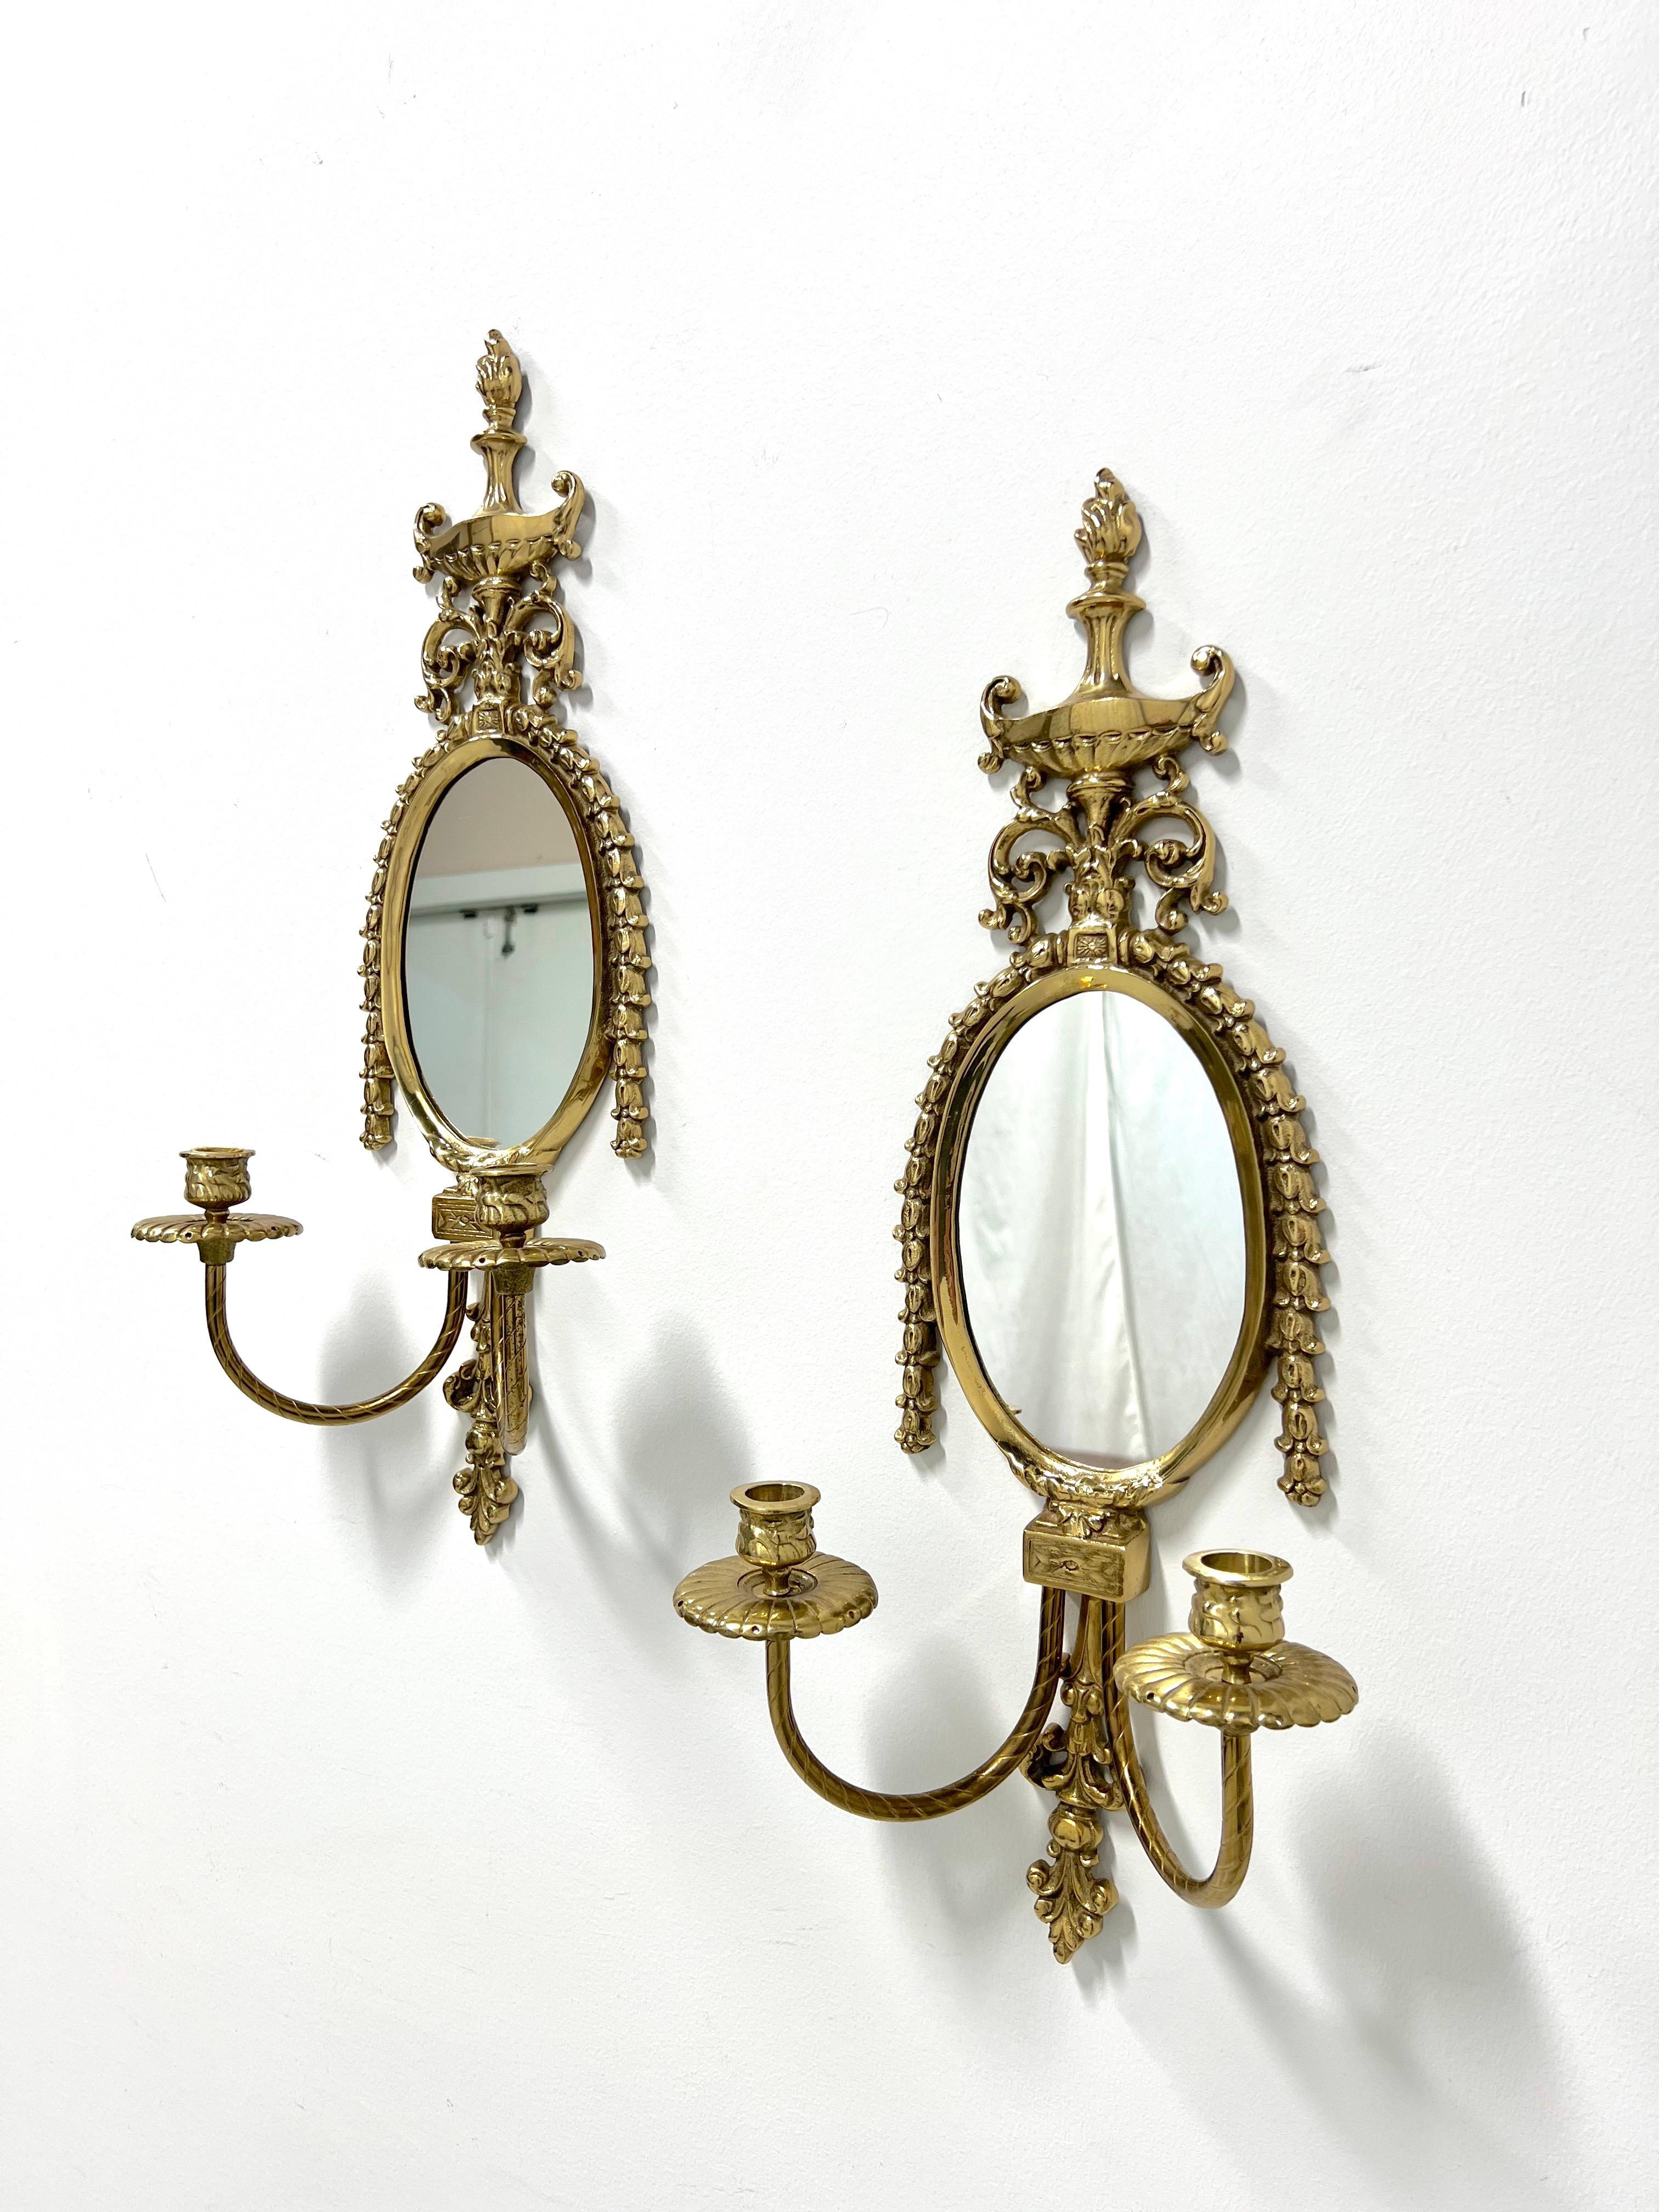 American GLO-MAR ARTWORKS Mid 20th Century Brass French Provincial Candle Sconces - Pair For Sale